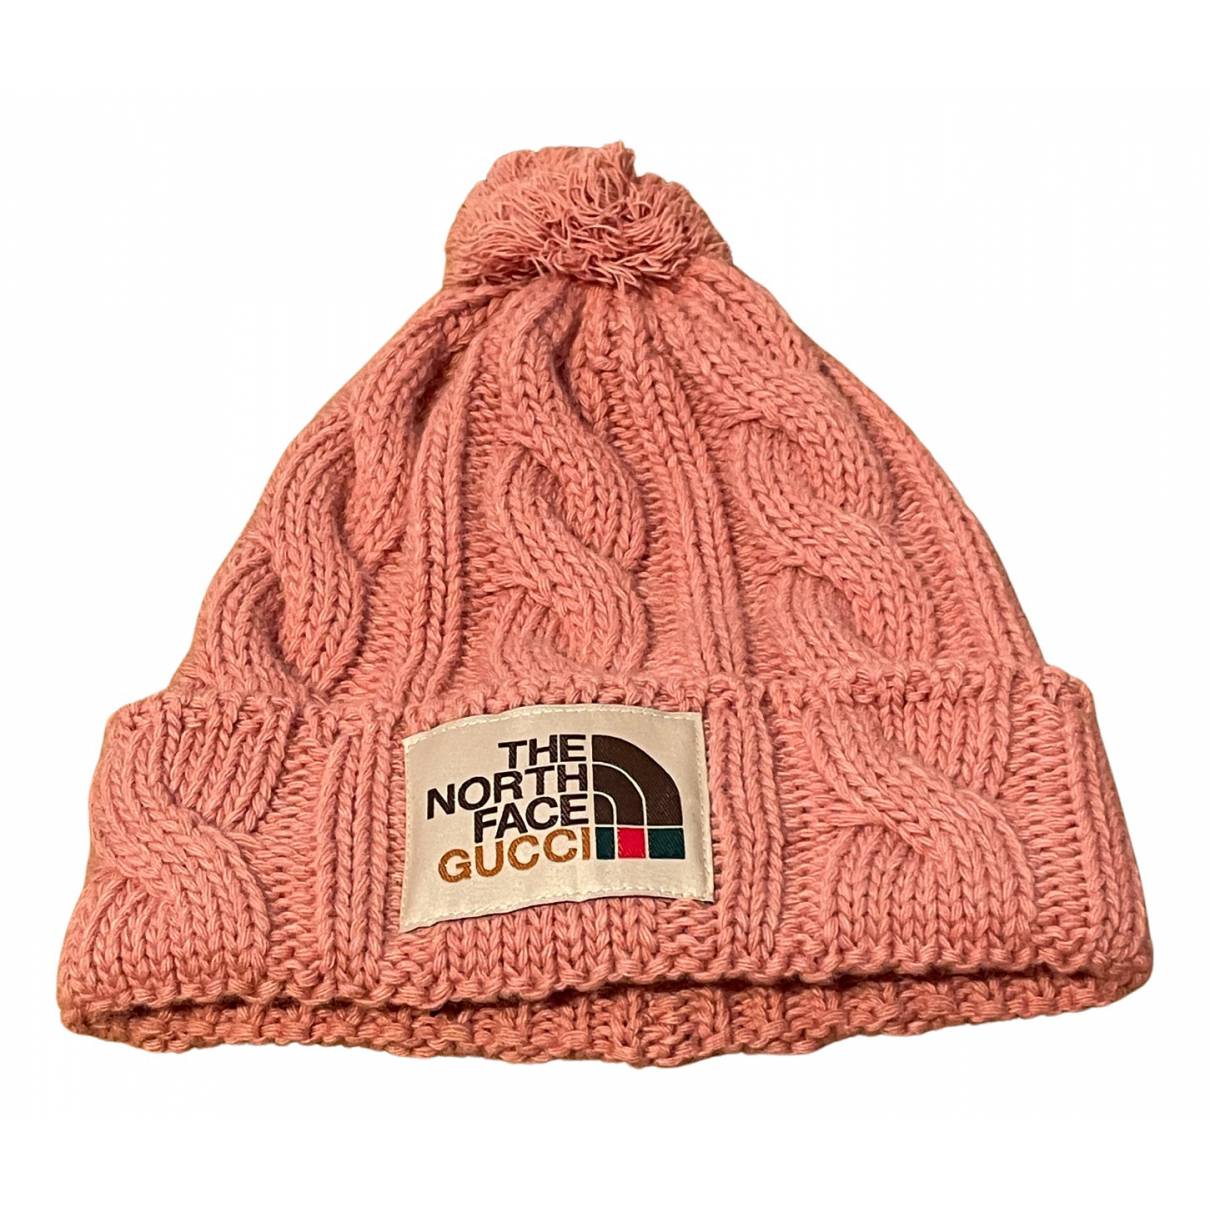 Wool beanie The North Face x Gucci Pink size L International in